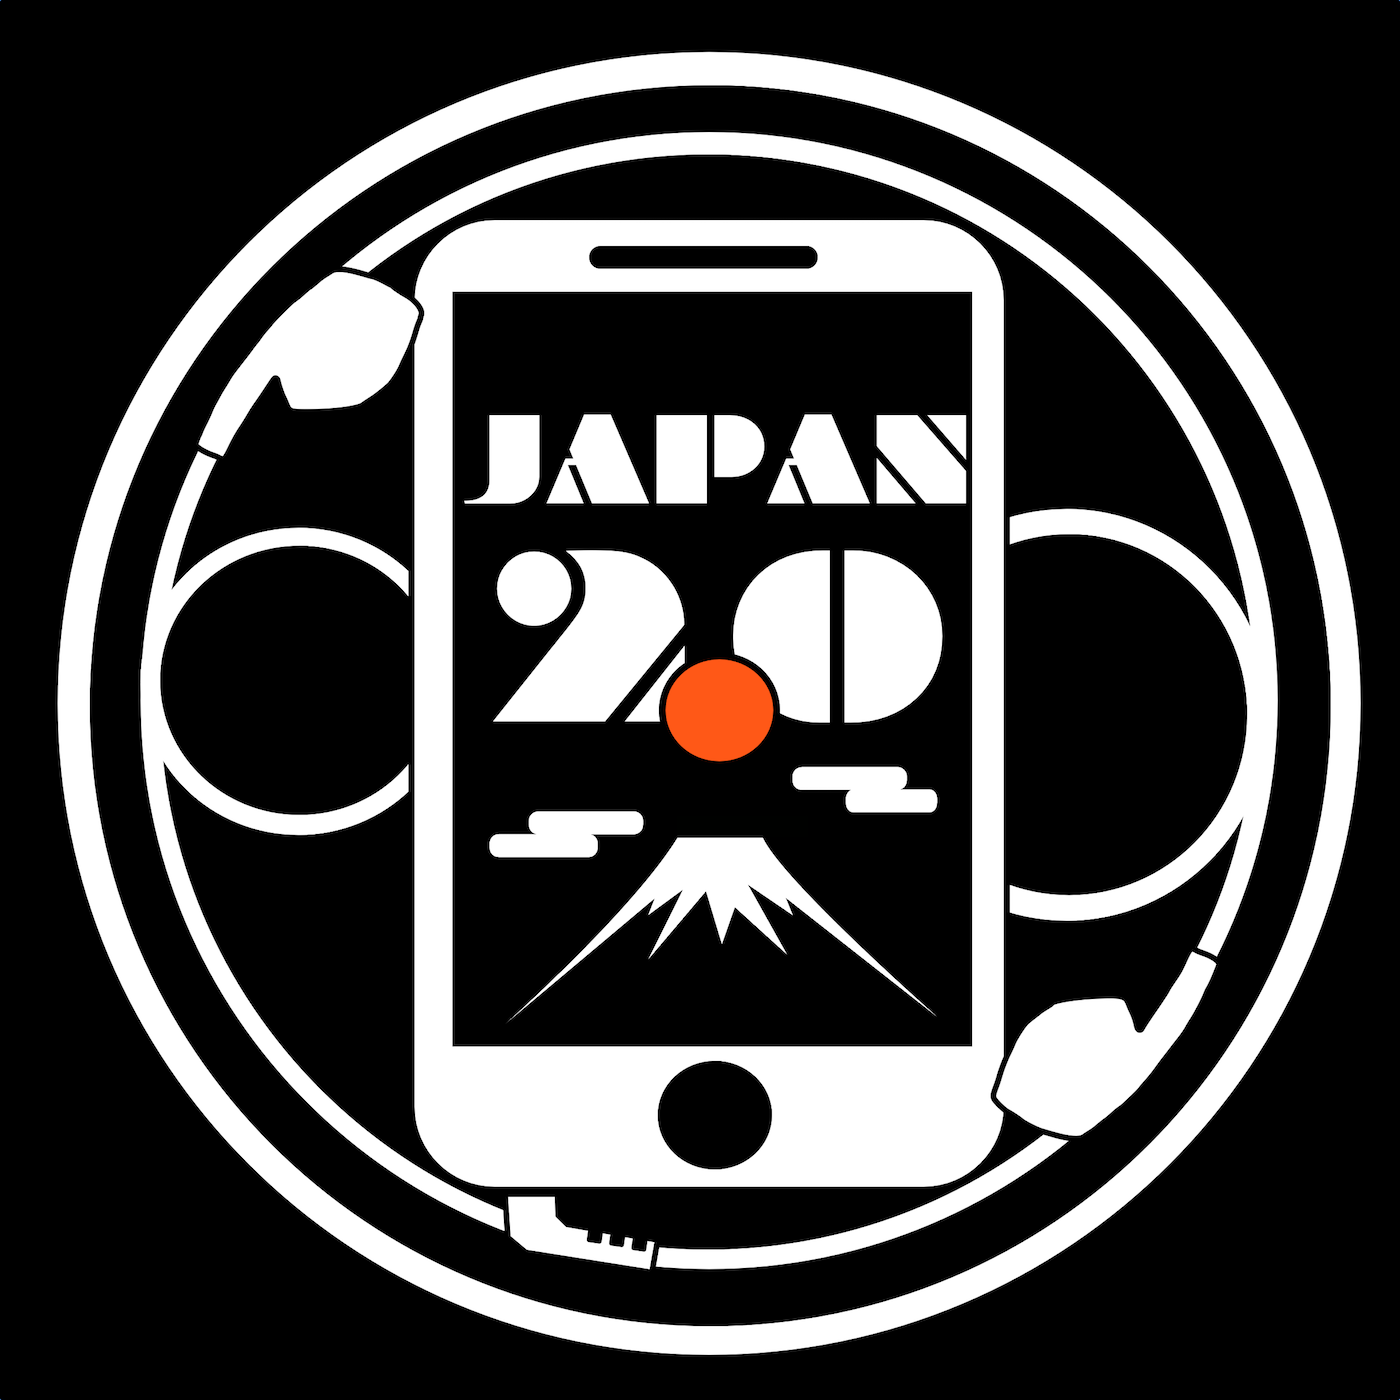 Japan 2.0 - Japanese Subculture Podcast artwork